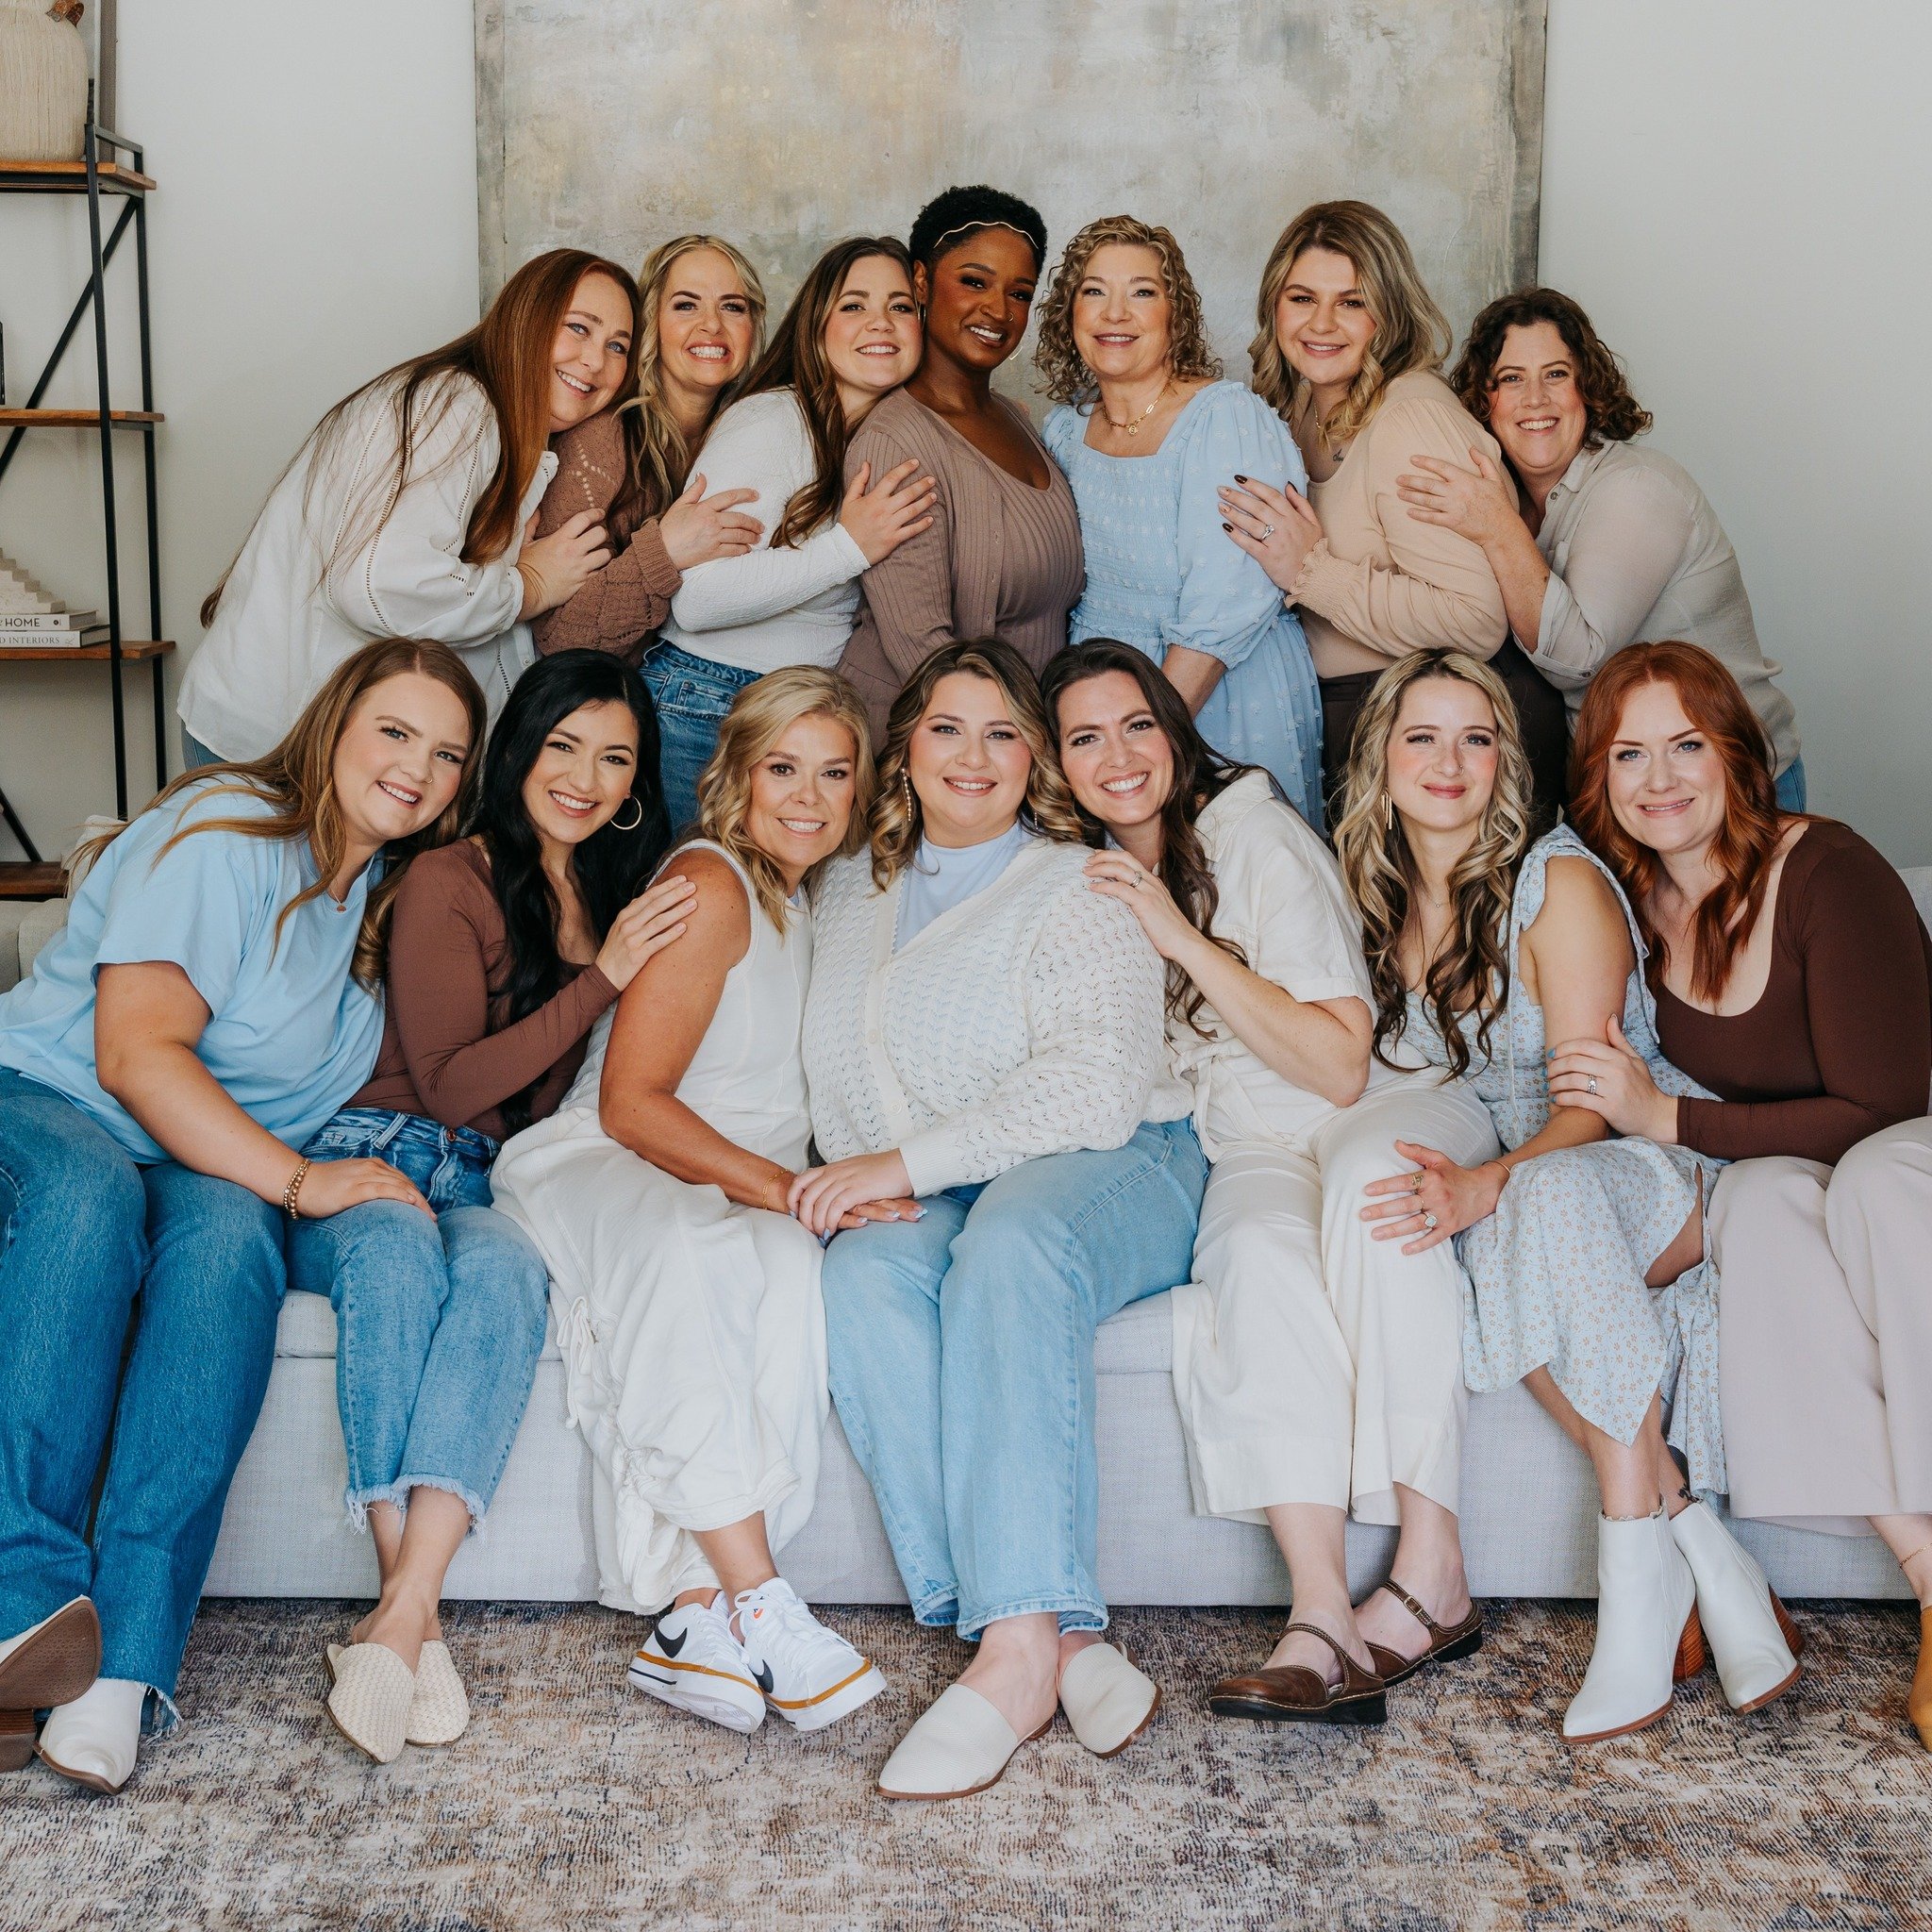 🌟 Welcome to Rebecca Rose Doula Services! 🌟

Established in 2019, Rebecca Rose Doulas specializes compassionate birth support and postpartum care. We are thrilled to introduce you to our team of dedicated doulas, each ready to support you on your u